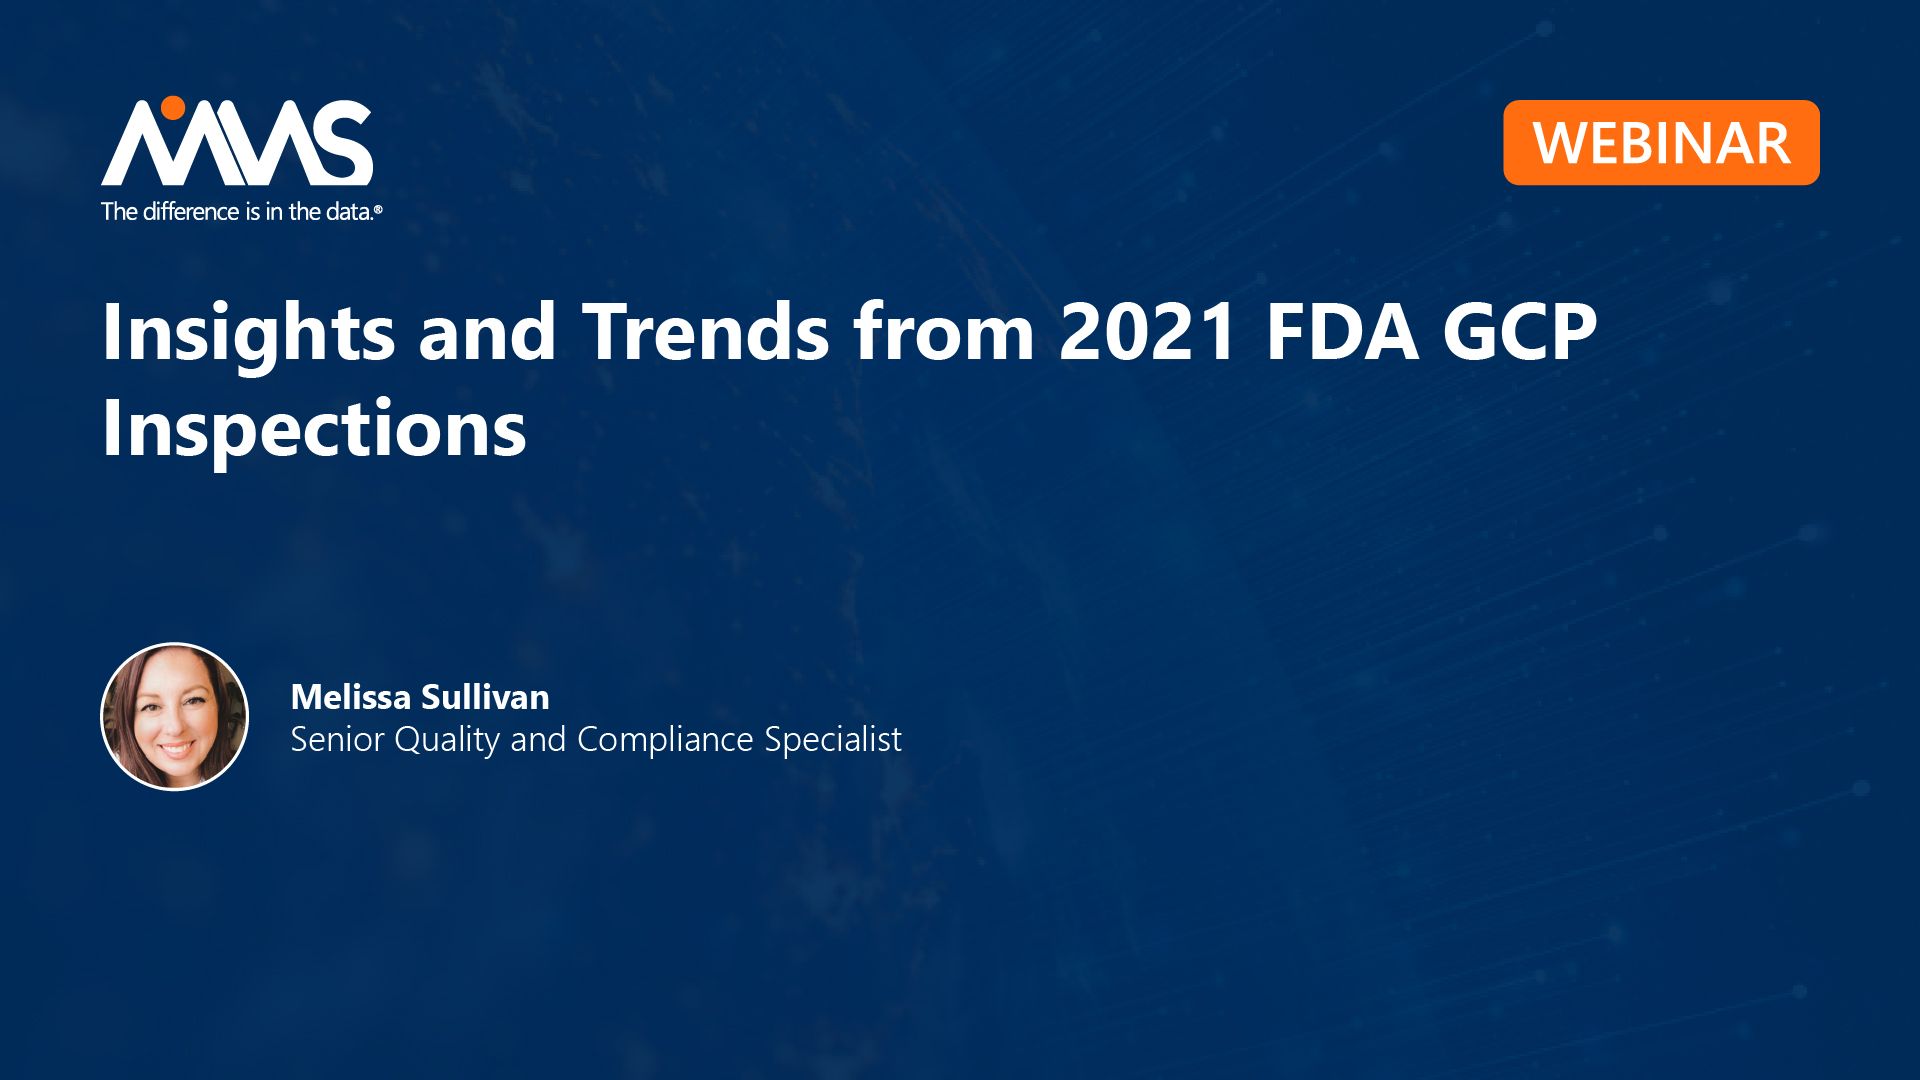 Insights and Trends from 2021 FDA GCP Inspections.